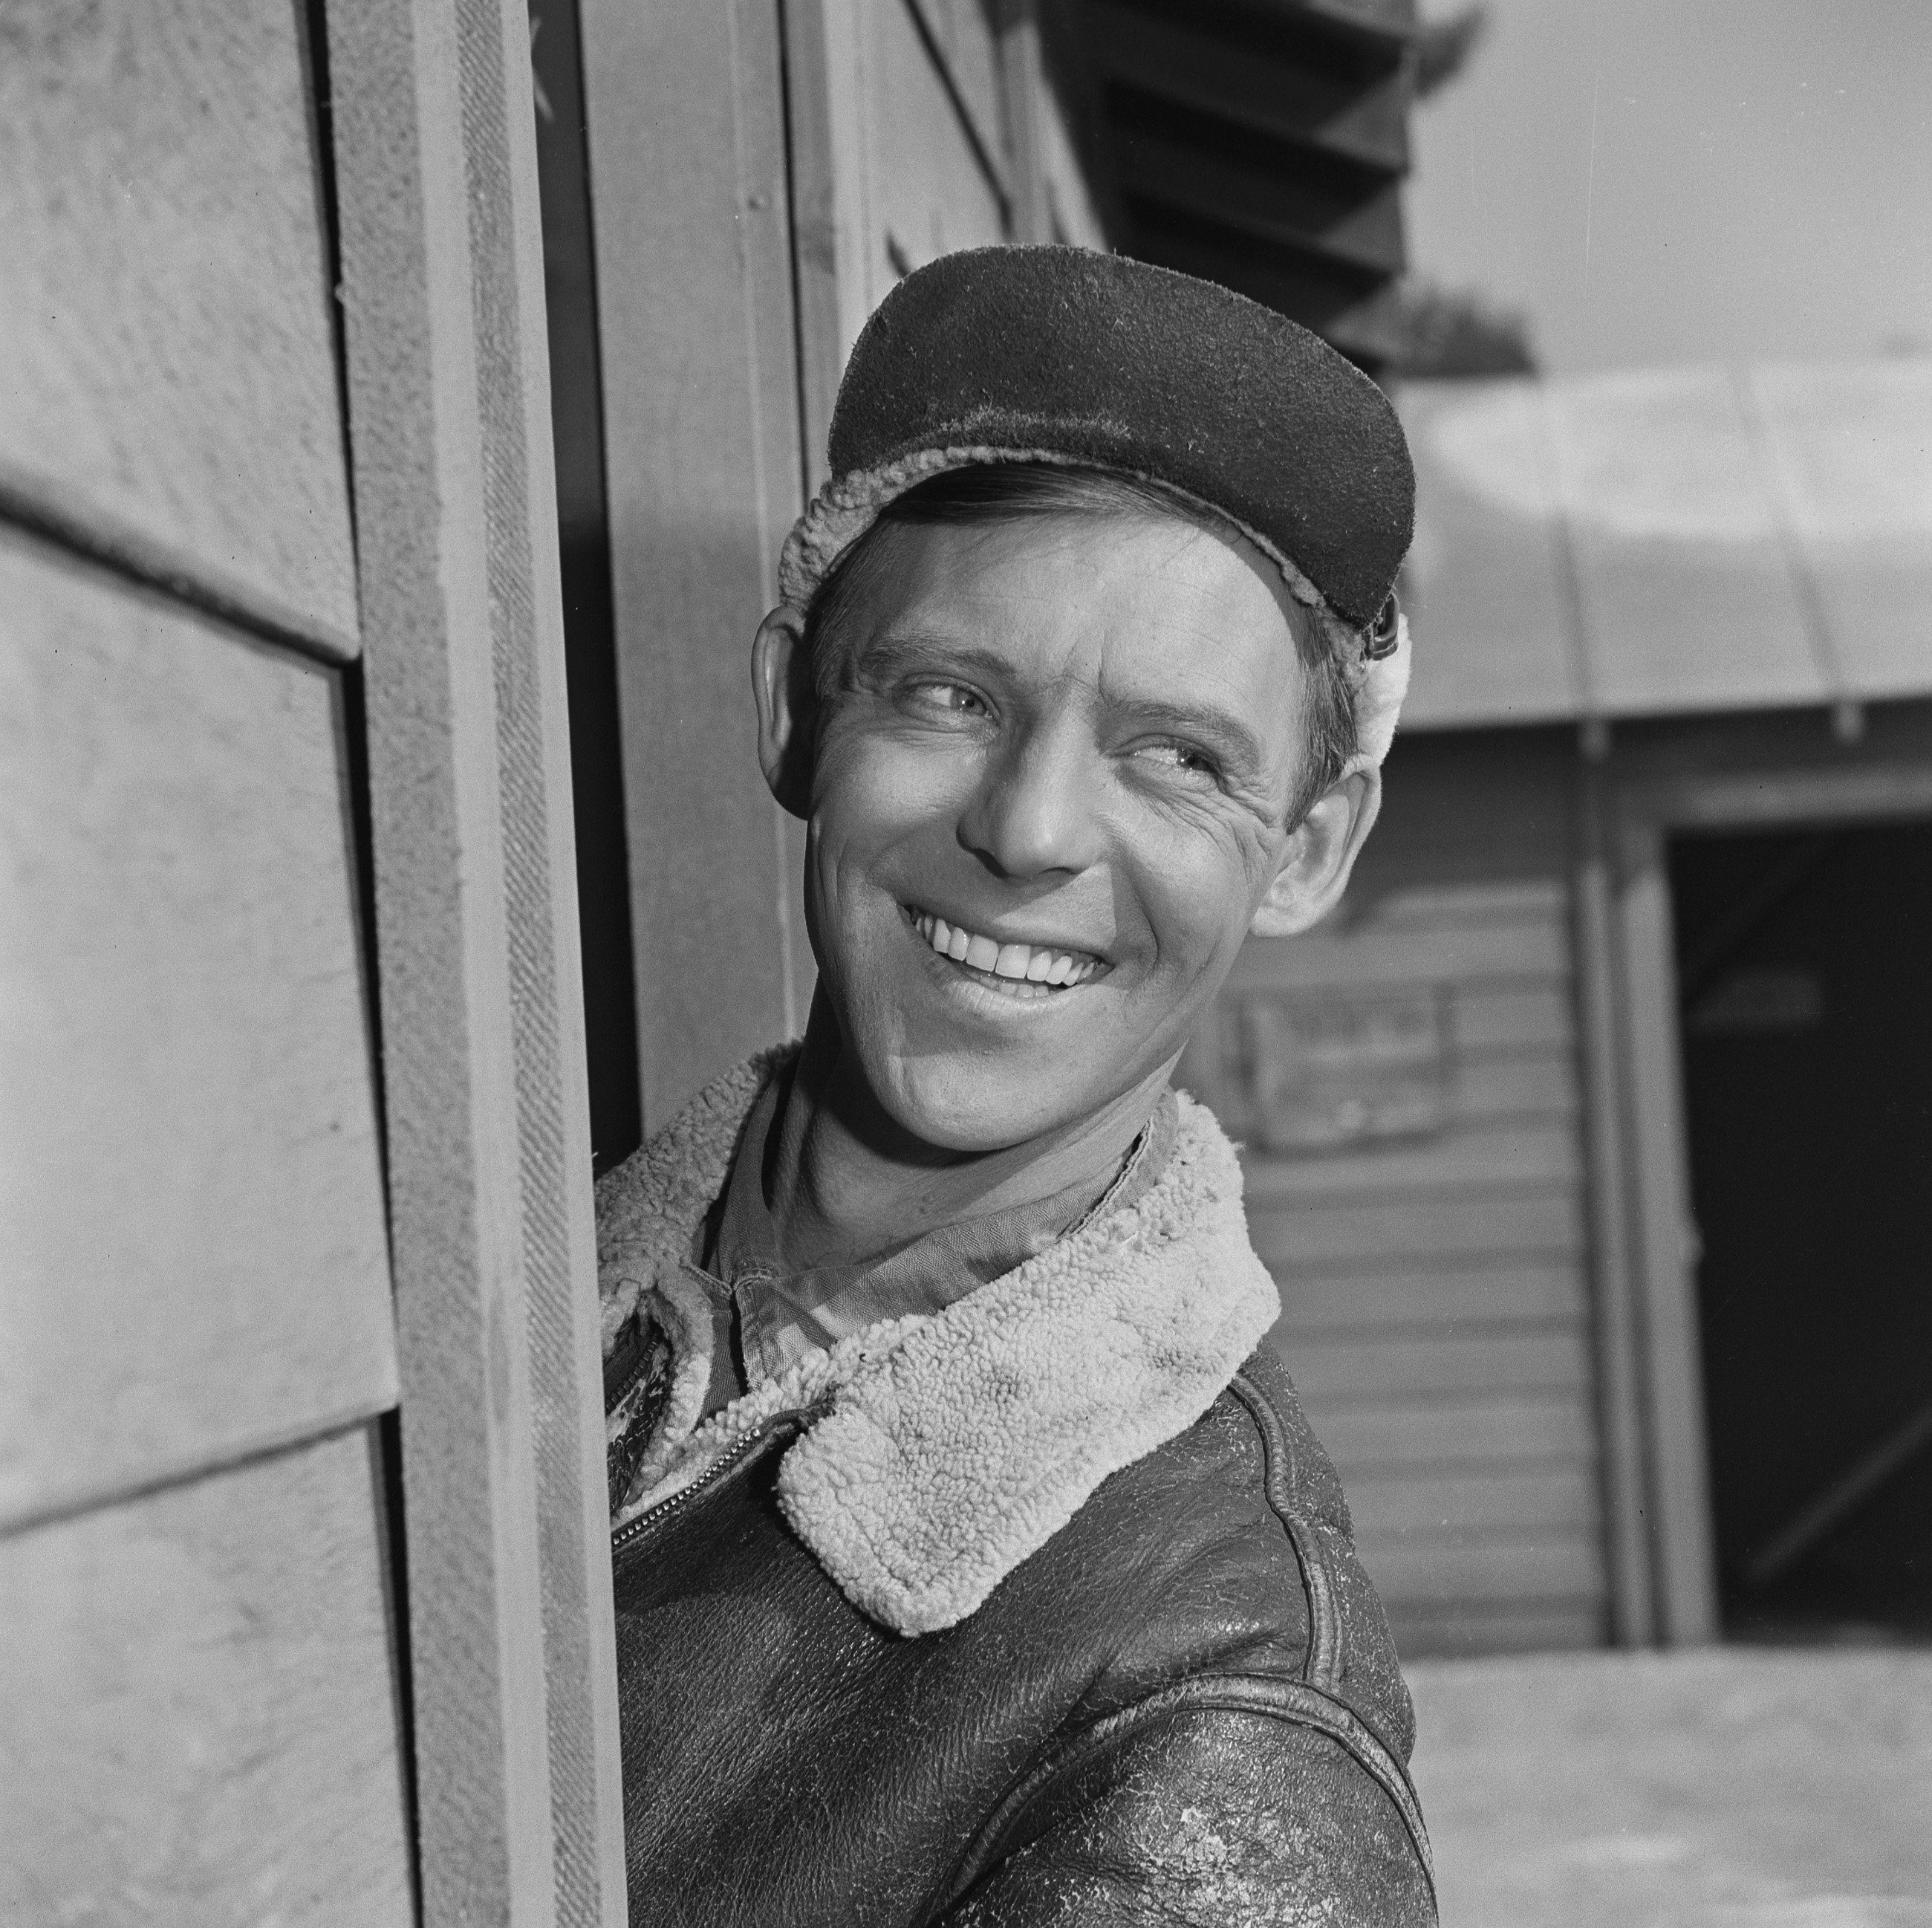 Larry Hovis as Sgt. Andrew Carter in an episode from CBS' comedy television series, "Hogan's Heroes", October 19, 1965. | Source: Getty Images.